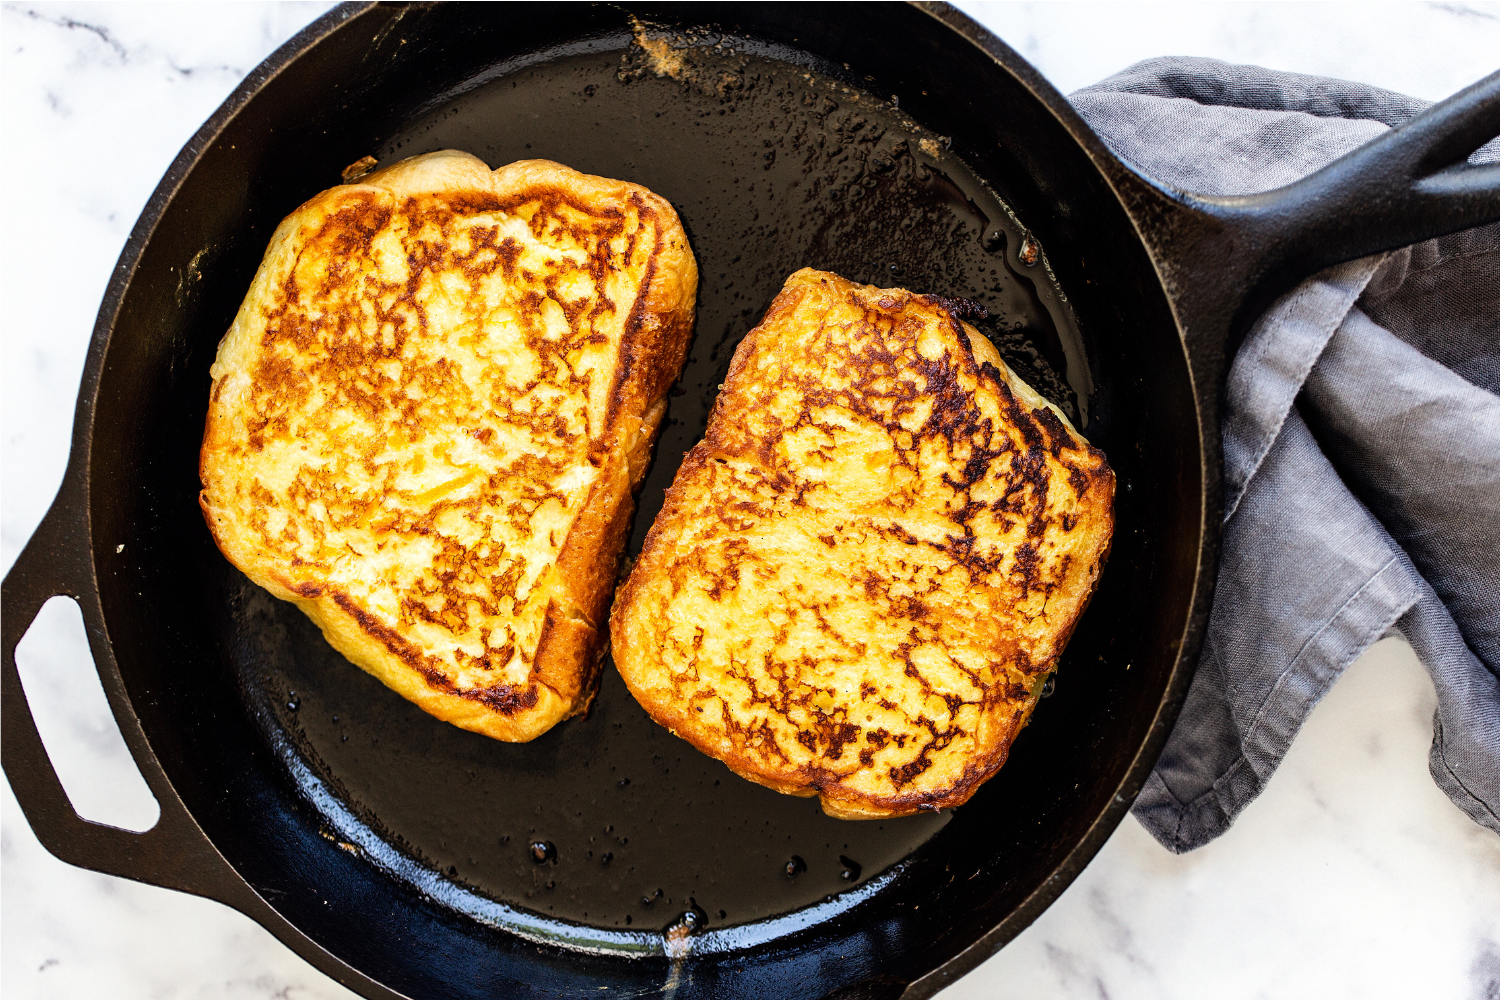 two slices of French toast in a skillet, cooking before serving